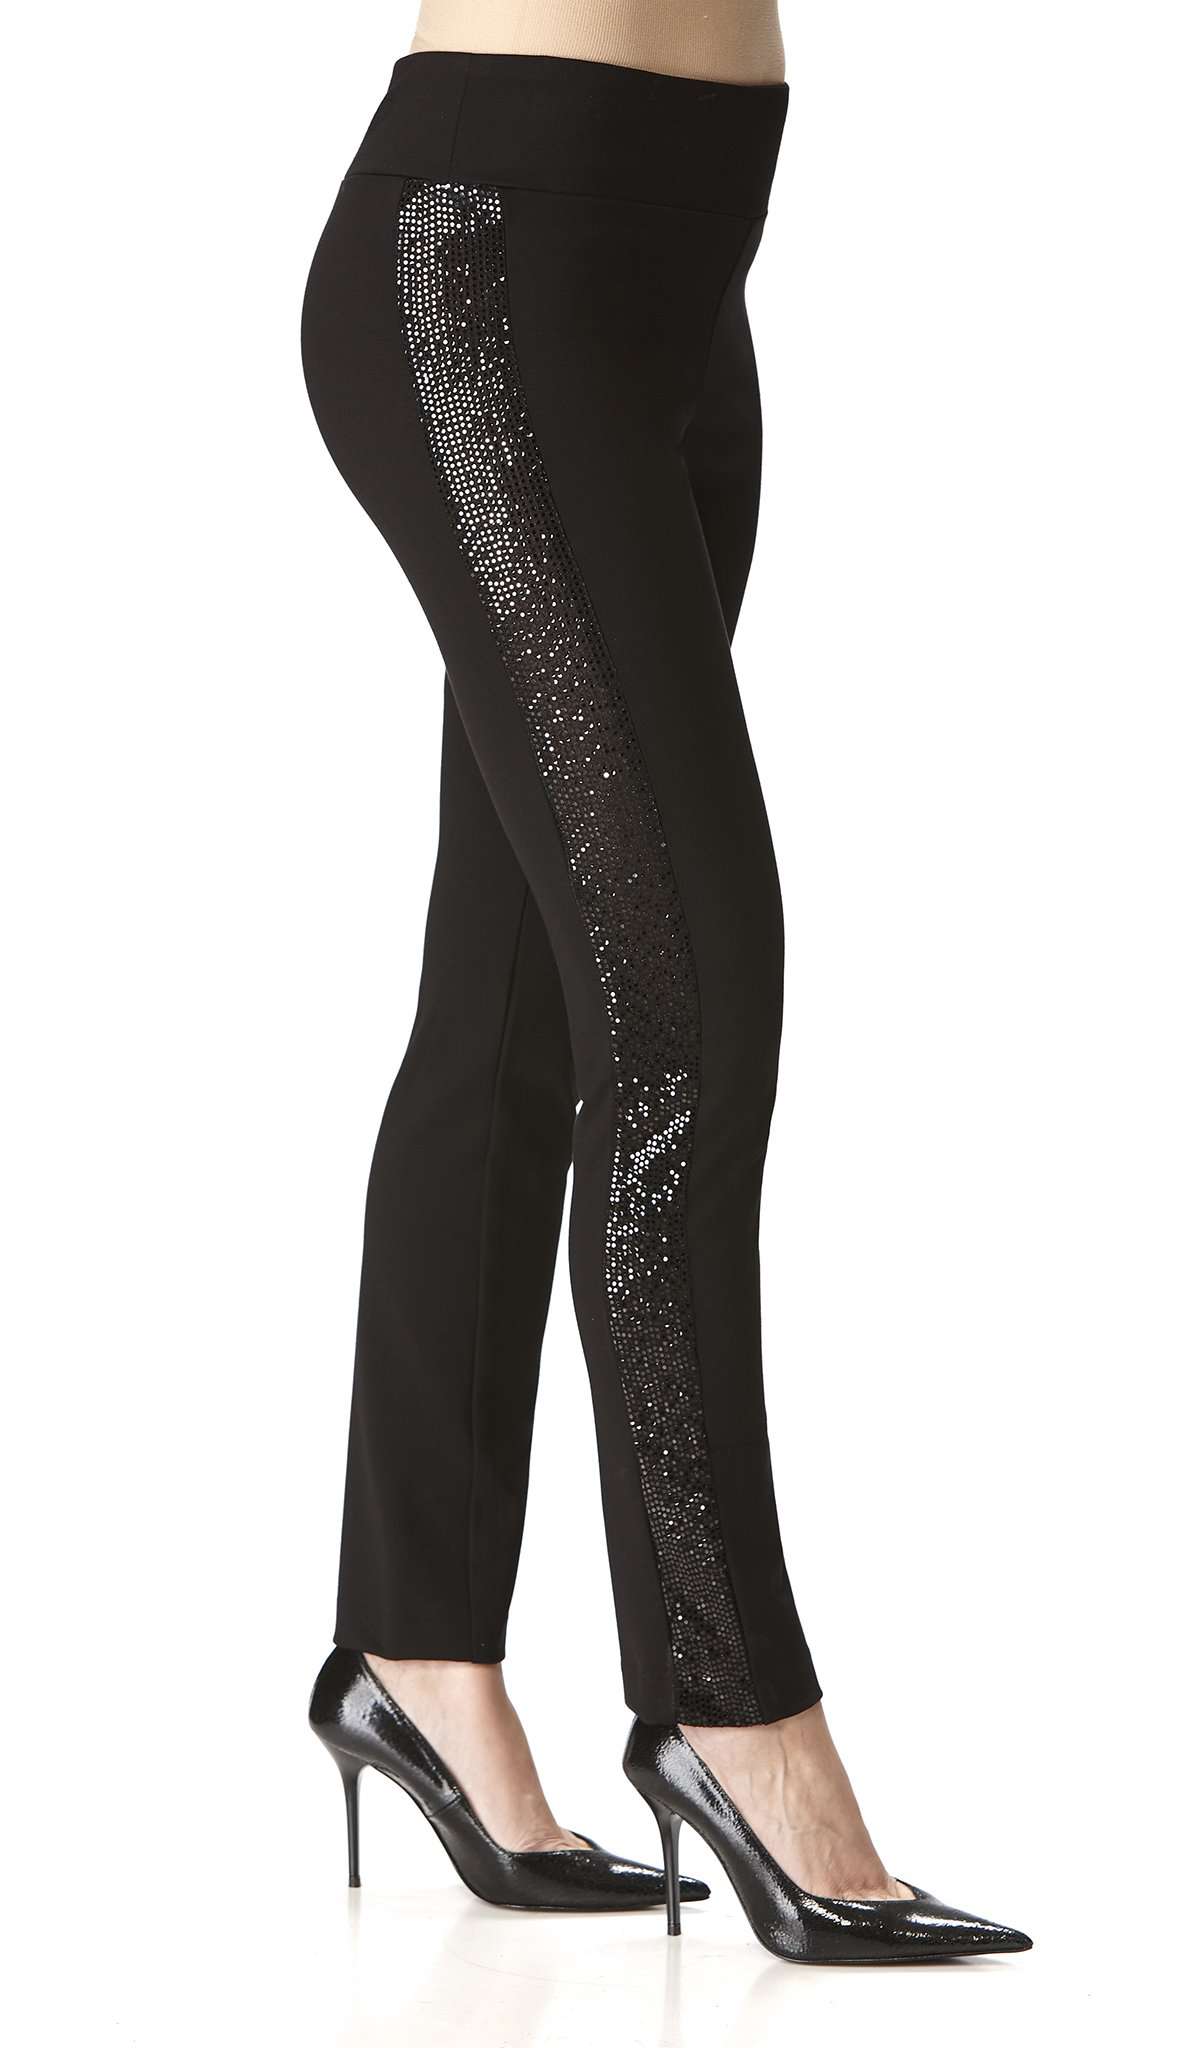 Women's Pants Black Sequined Side Detail Quality Stretch Fabric Made in Canada - Yvonne Marie - Yvonne Marie